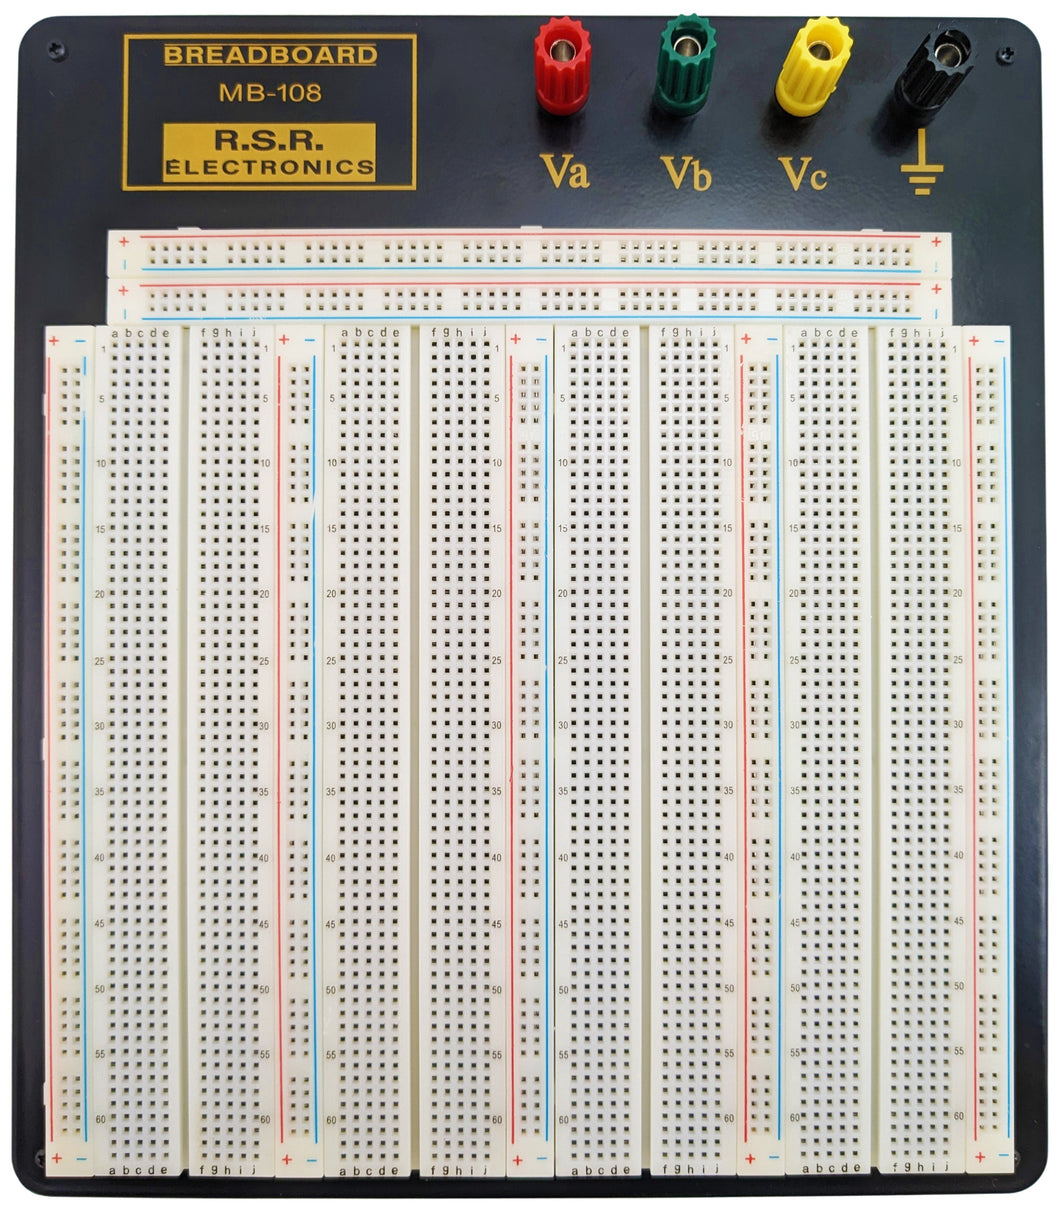 3220 Tie Point Solderless Breadboard with 4 Binding Posts, Metal Backplate with Rubber Feet, 10.2